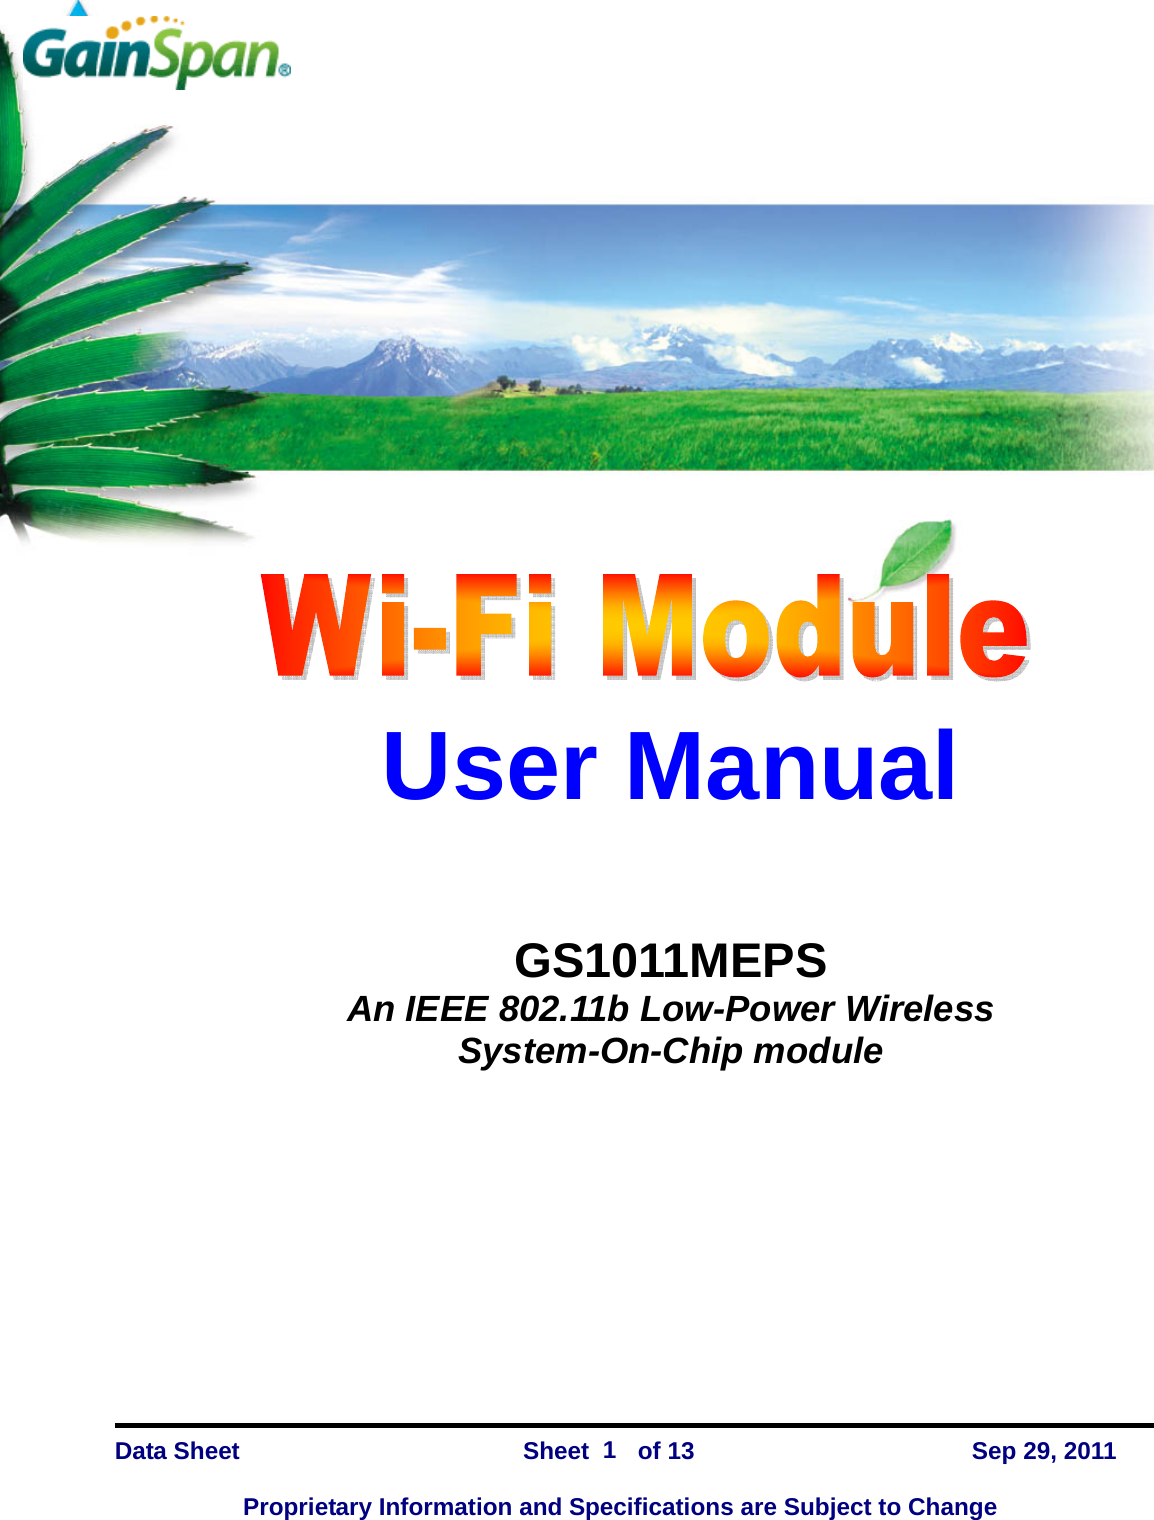   GS1011MEPS    Data Sheet                Sheet    of 13      Sep 29, 2011  Proprietary Information and Specifications are Subject to Change 1  User Manual   GS1011MEPS An IEEE 802.11b Low-Power Wireless System-On-Chip module 